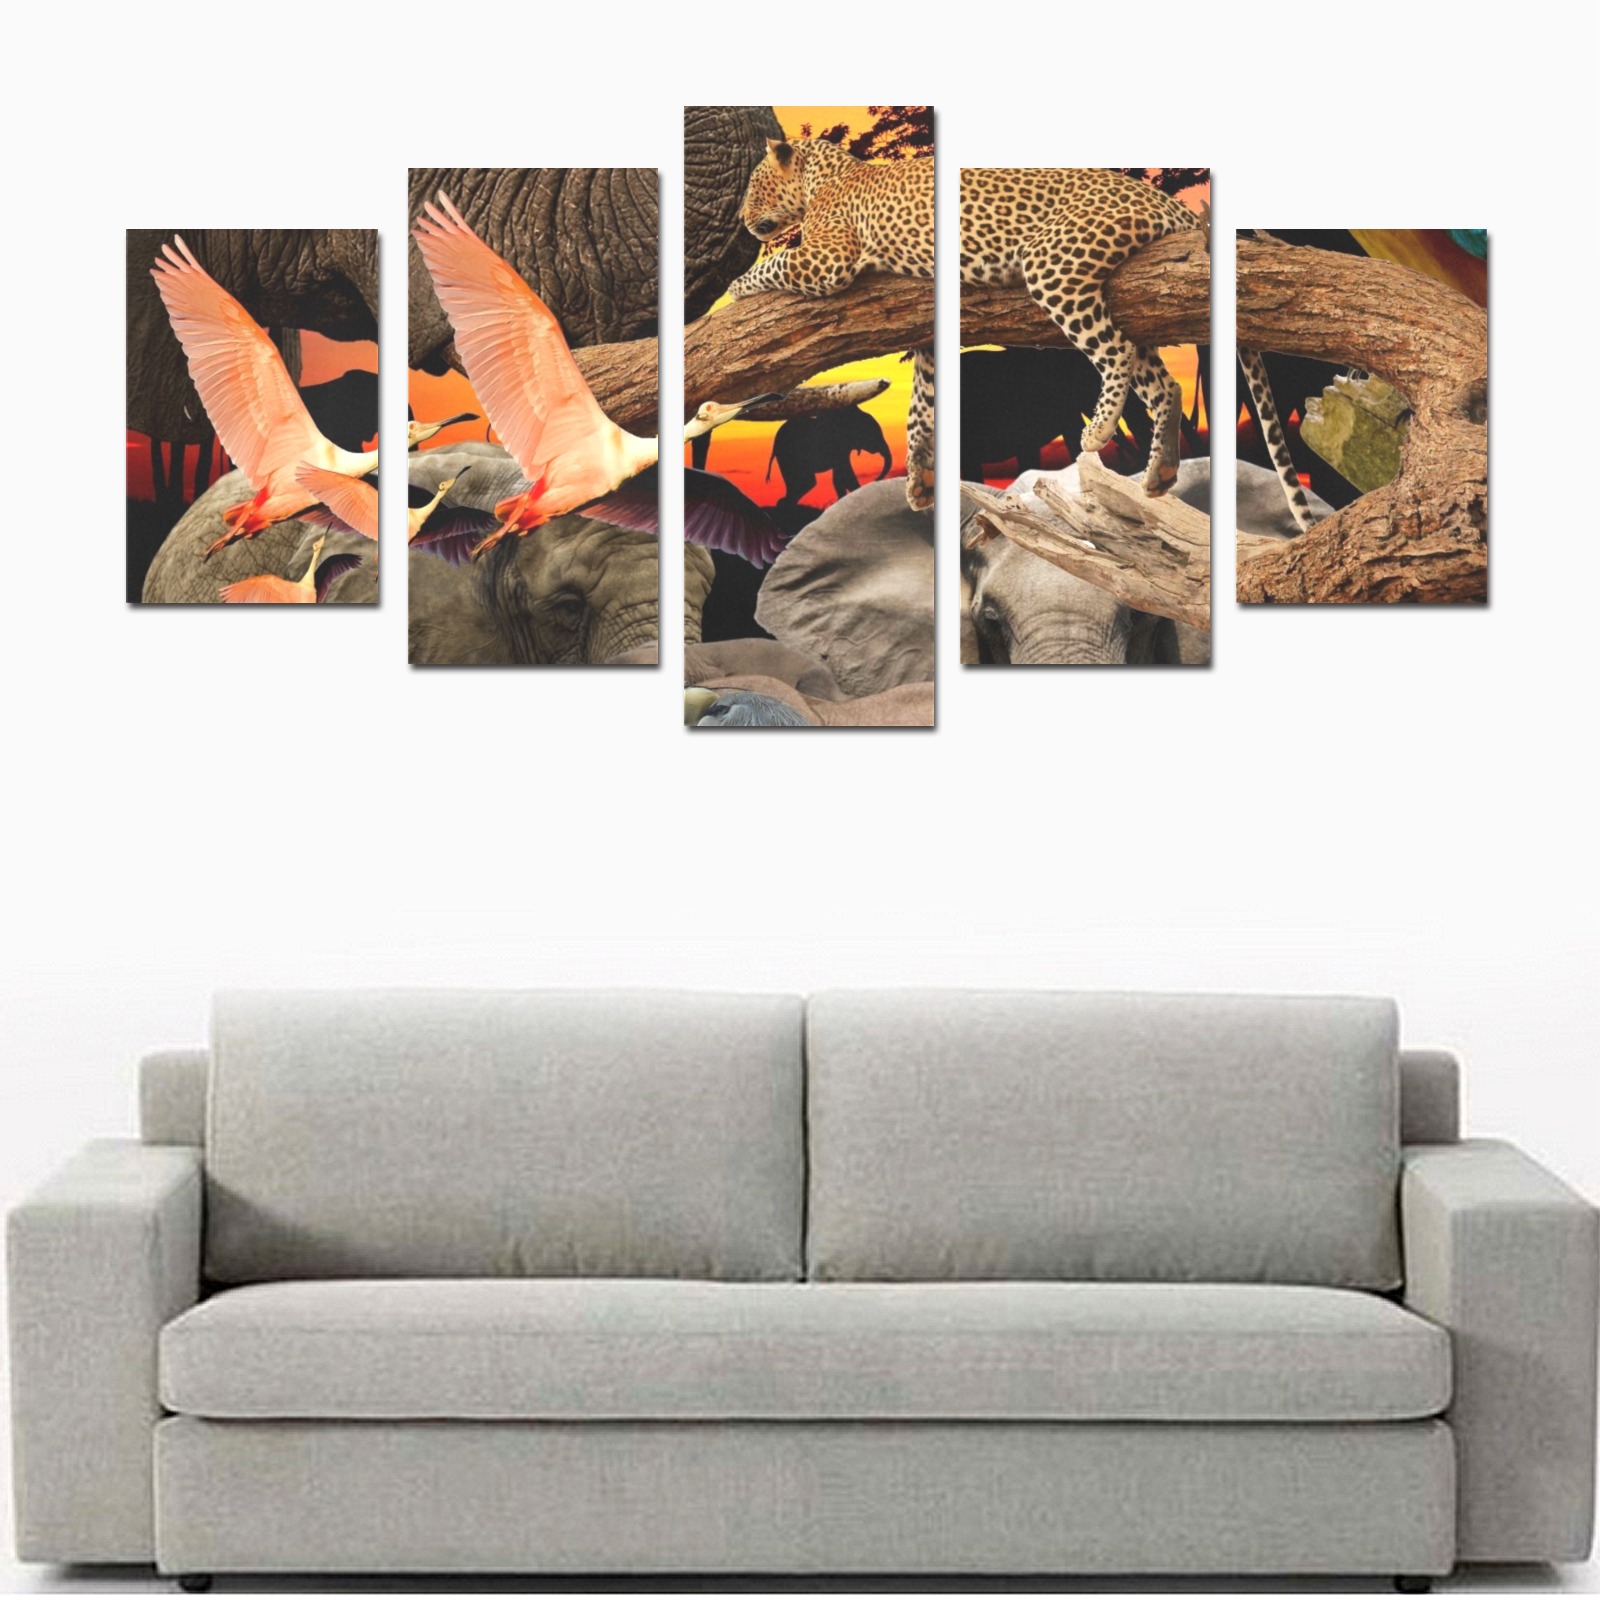 OUT OF AFRICA Canvas Print Sets D (No Frame)